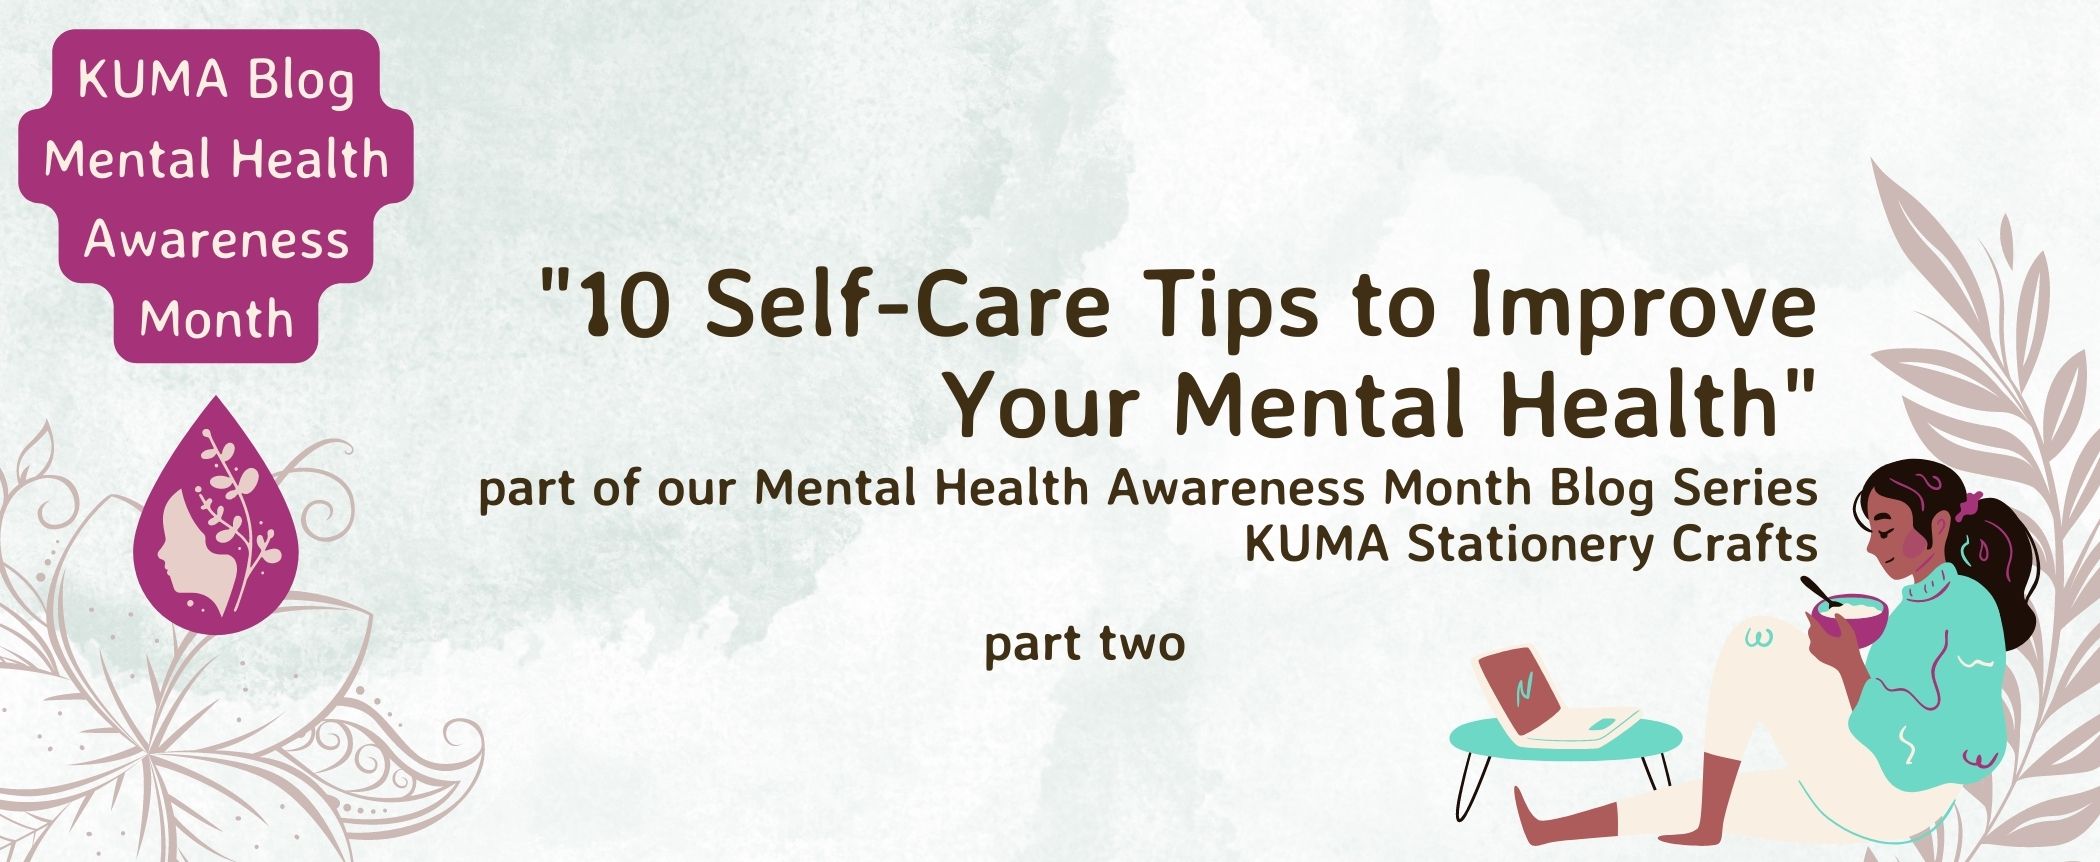 10 Self-Care Tips to Improve Your Mental Health This Mental Health Awareness Month | KUMA Stationery Crafts